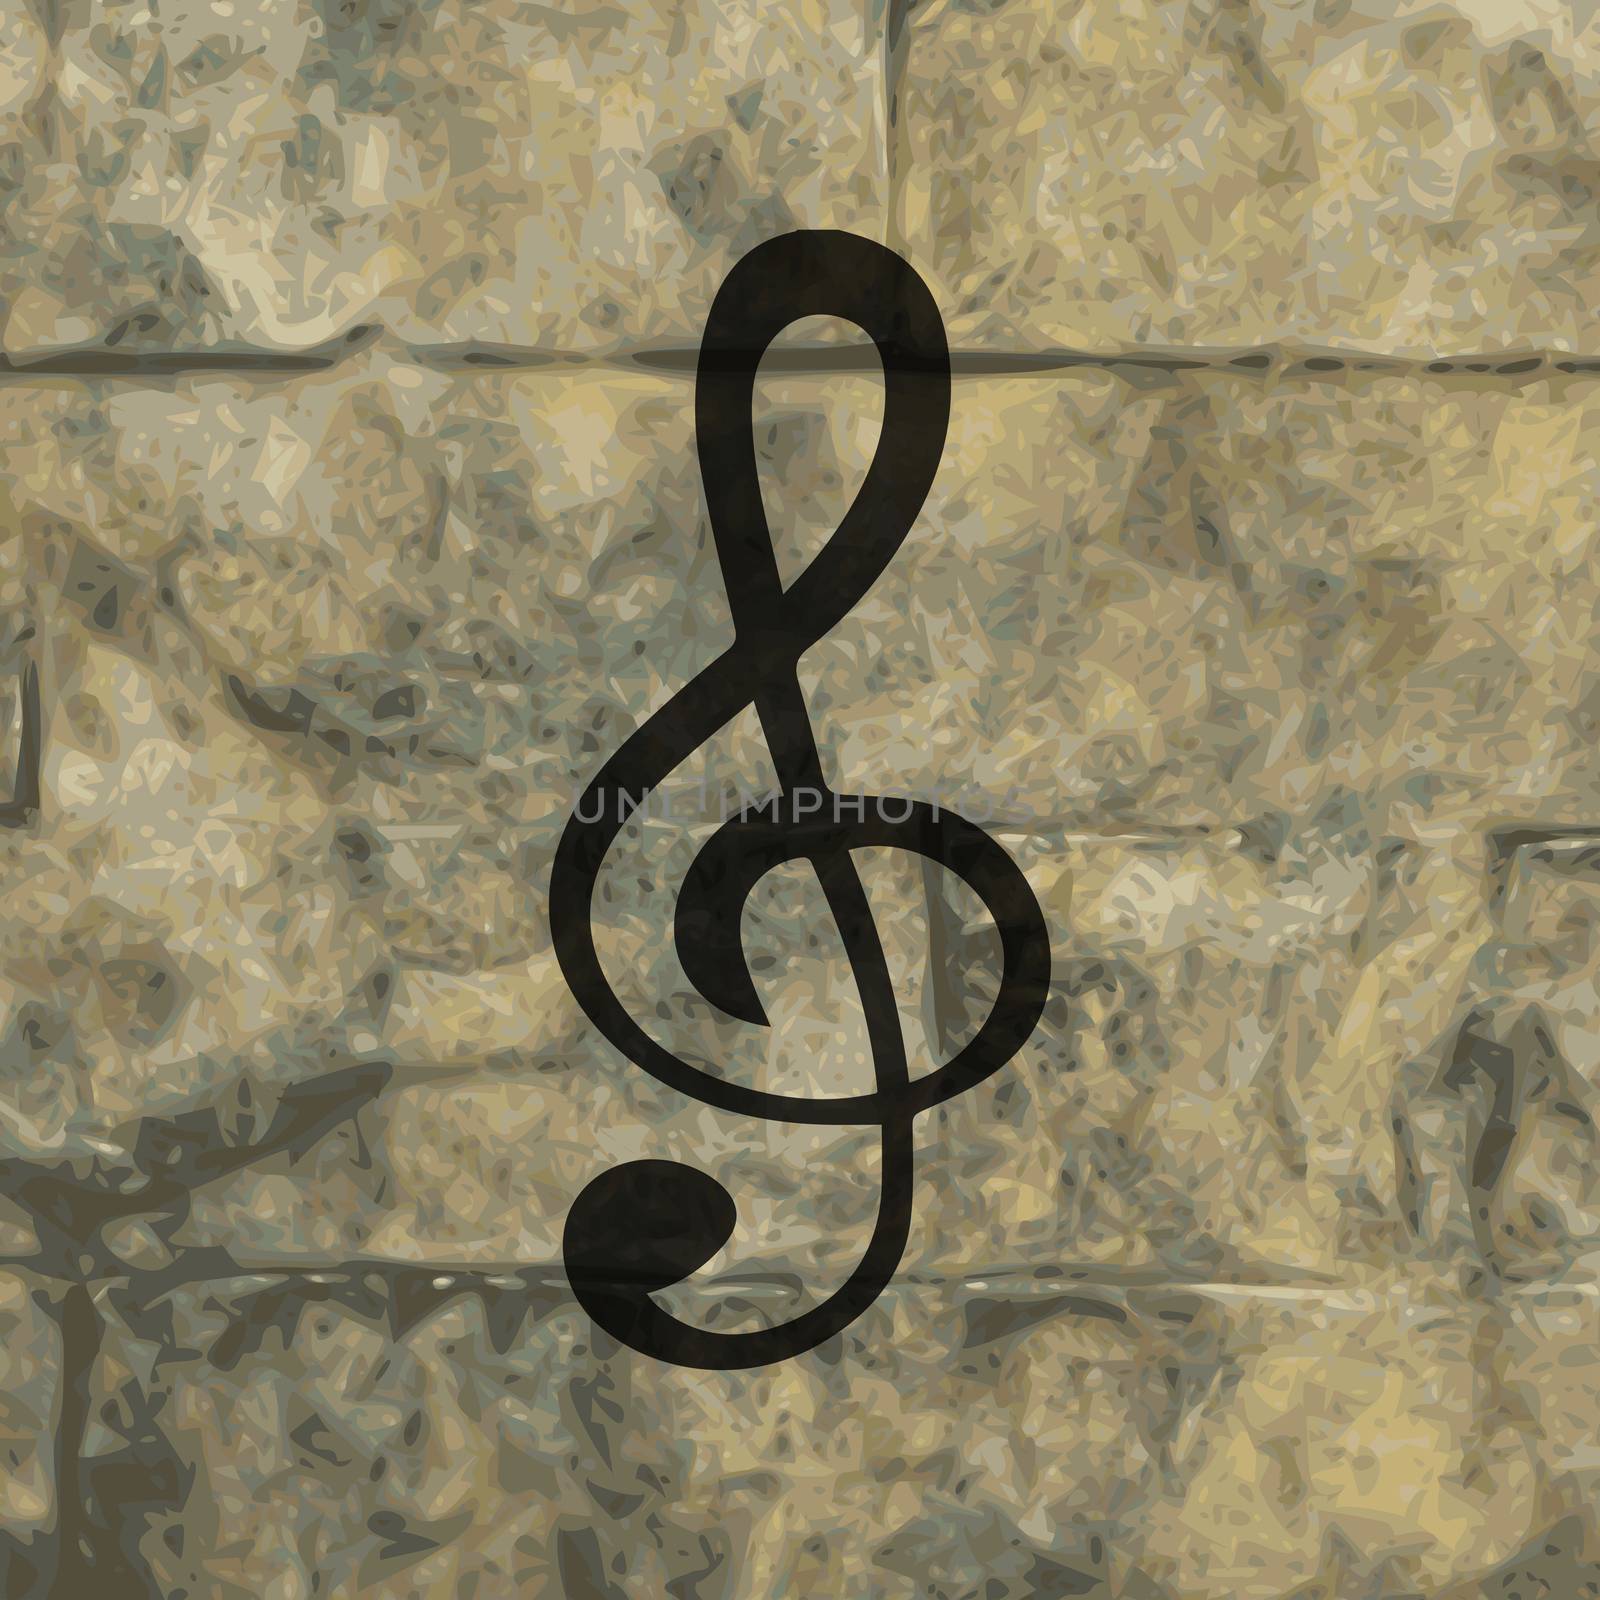 treble clef icon. Flat with abstract background.